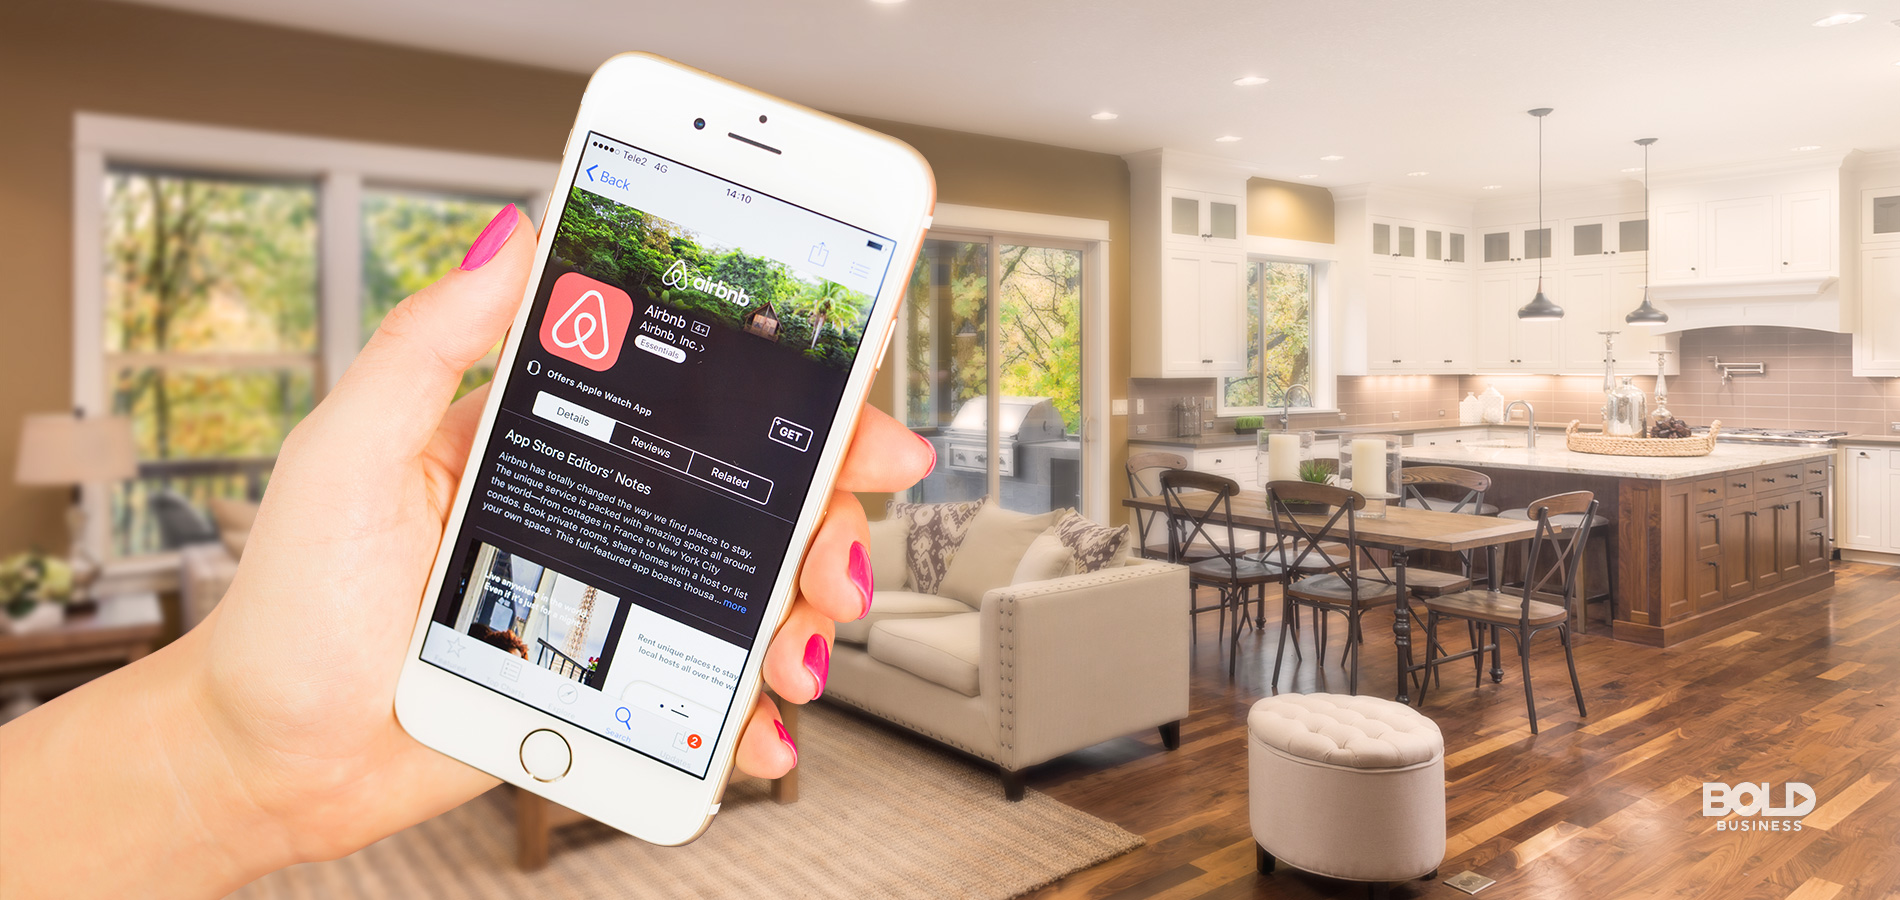 airbnb startup story, airbnb app on smartphone